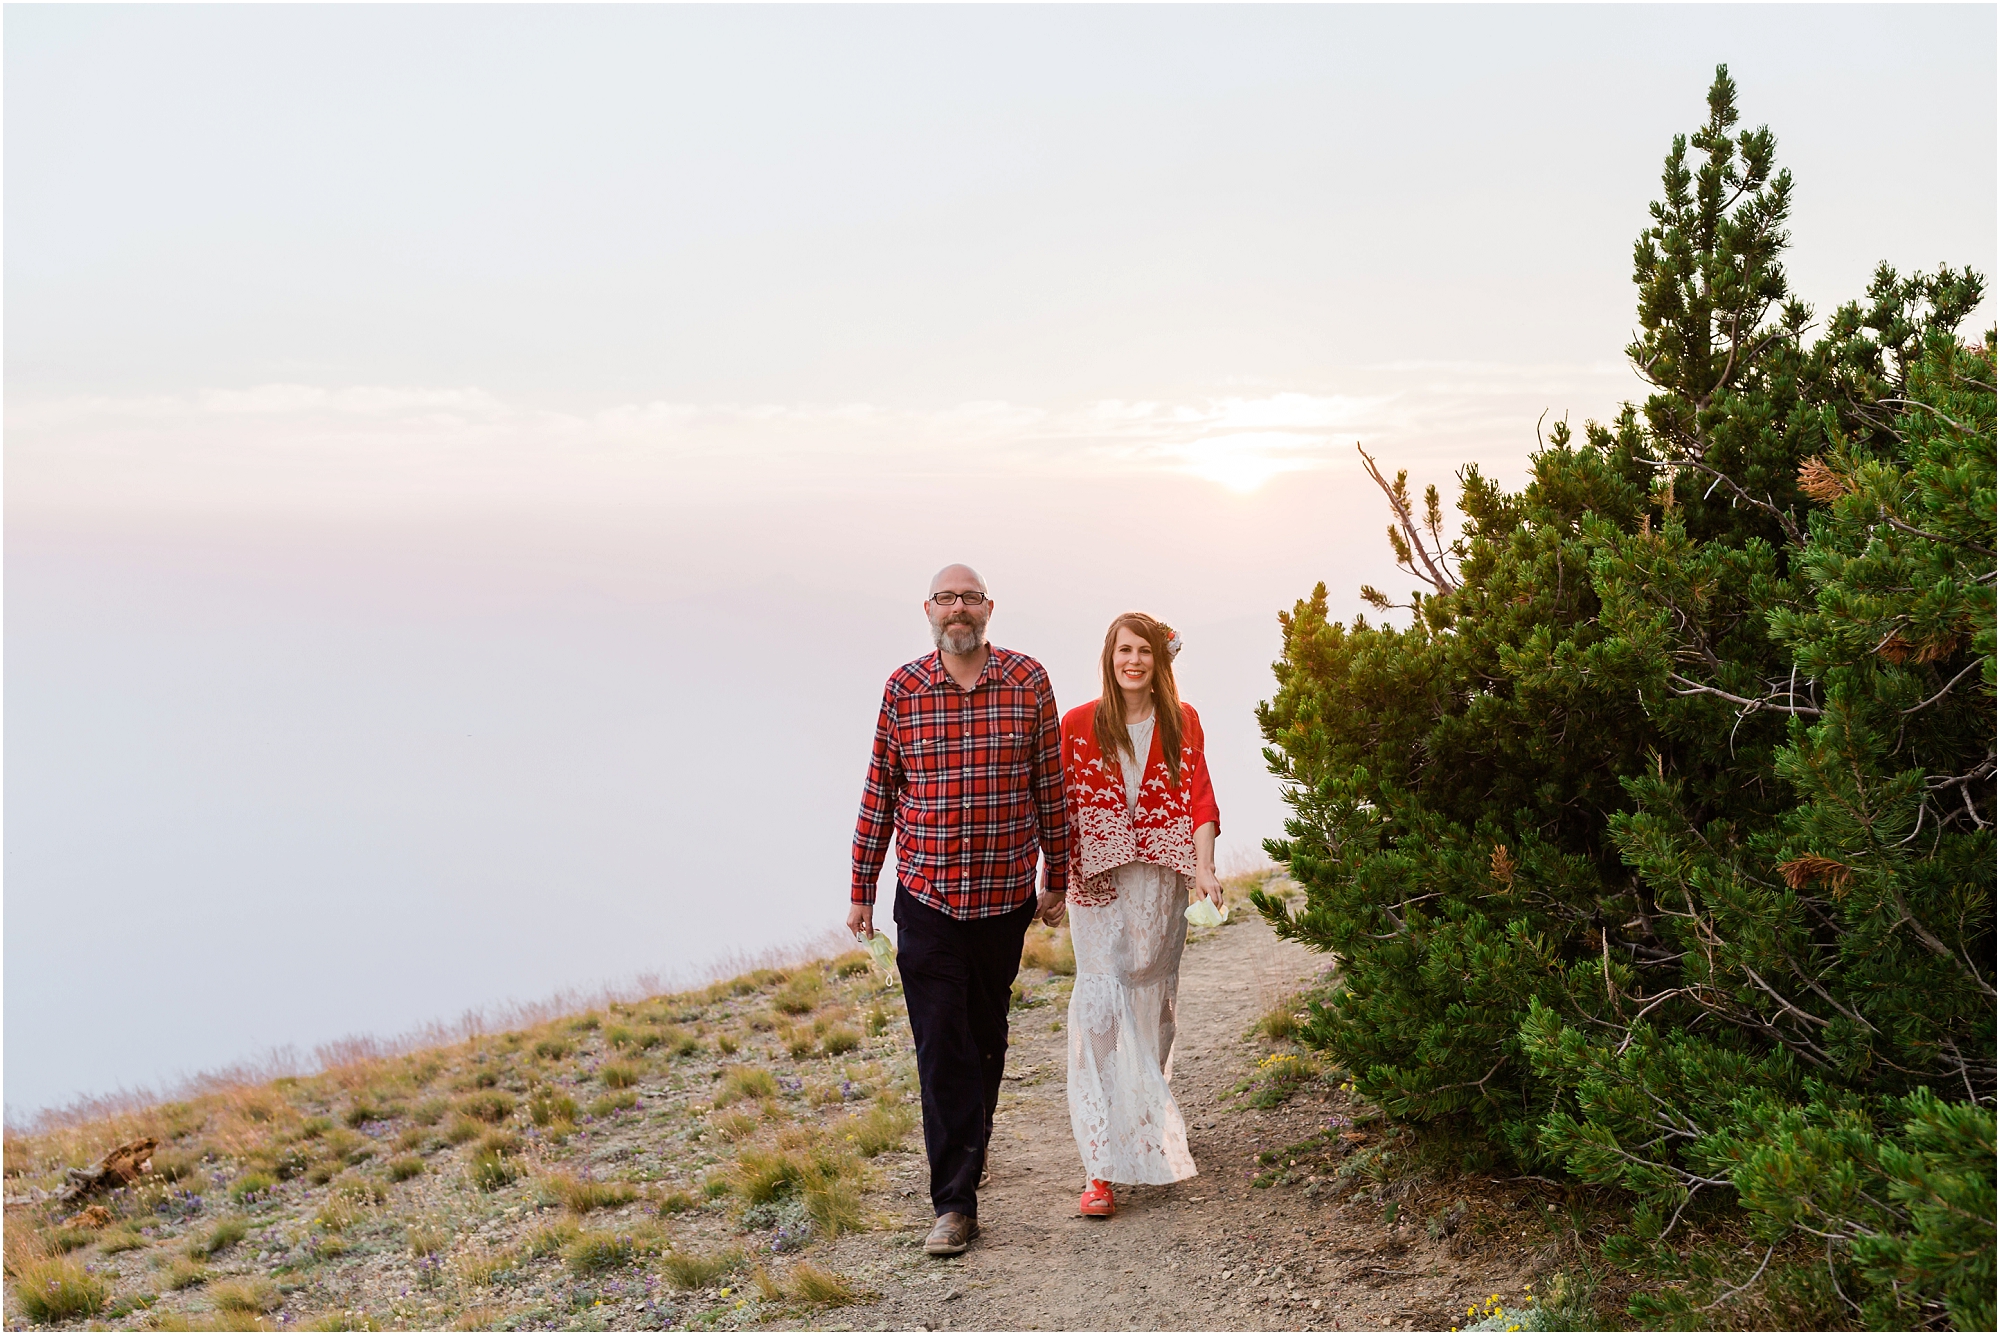 The sun starts dipping below the smoke, creating hazy glowing light as this couple hikes along the trail for their elopement at Crater Lake National Park in Oregon. | Erica Swantek Photography